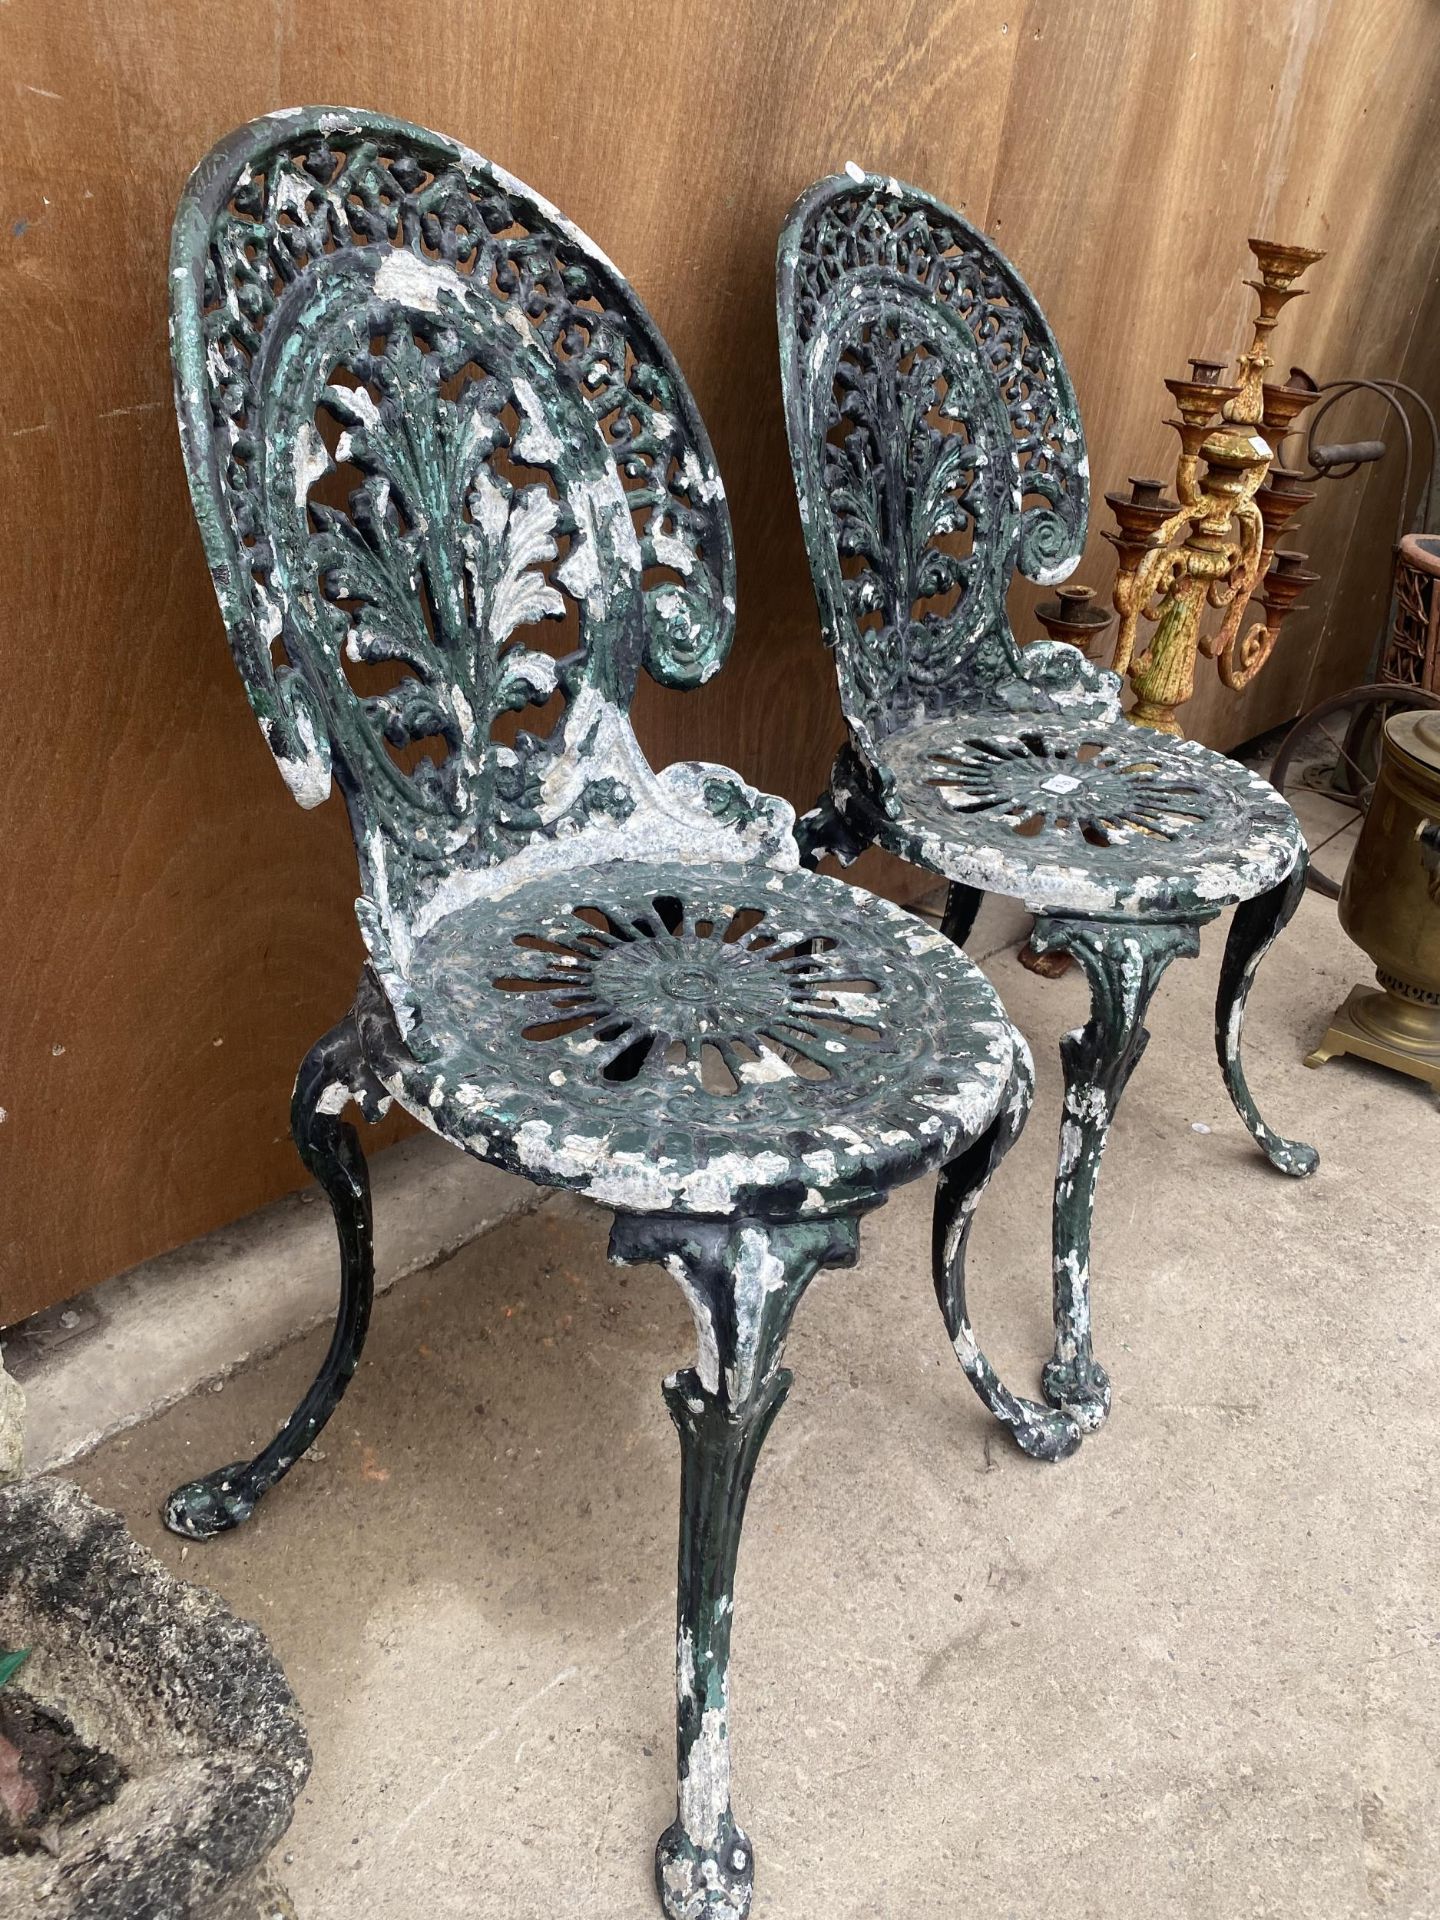 A PAIR OF VINTAGE CAST ALLOY BISTRO CHAIRS - Image 2 of 2